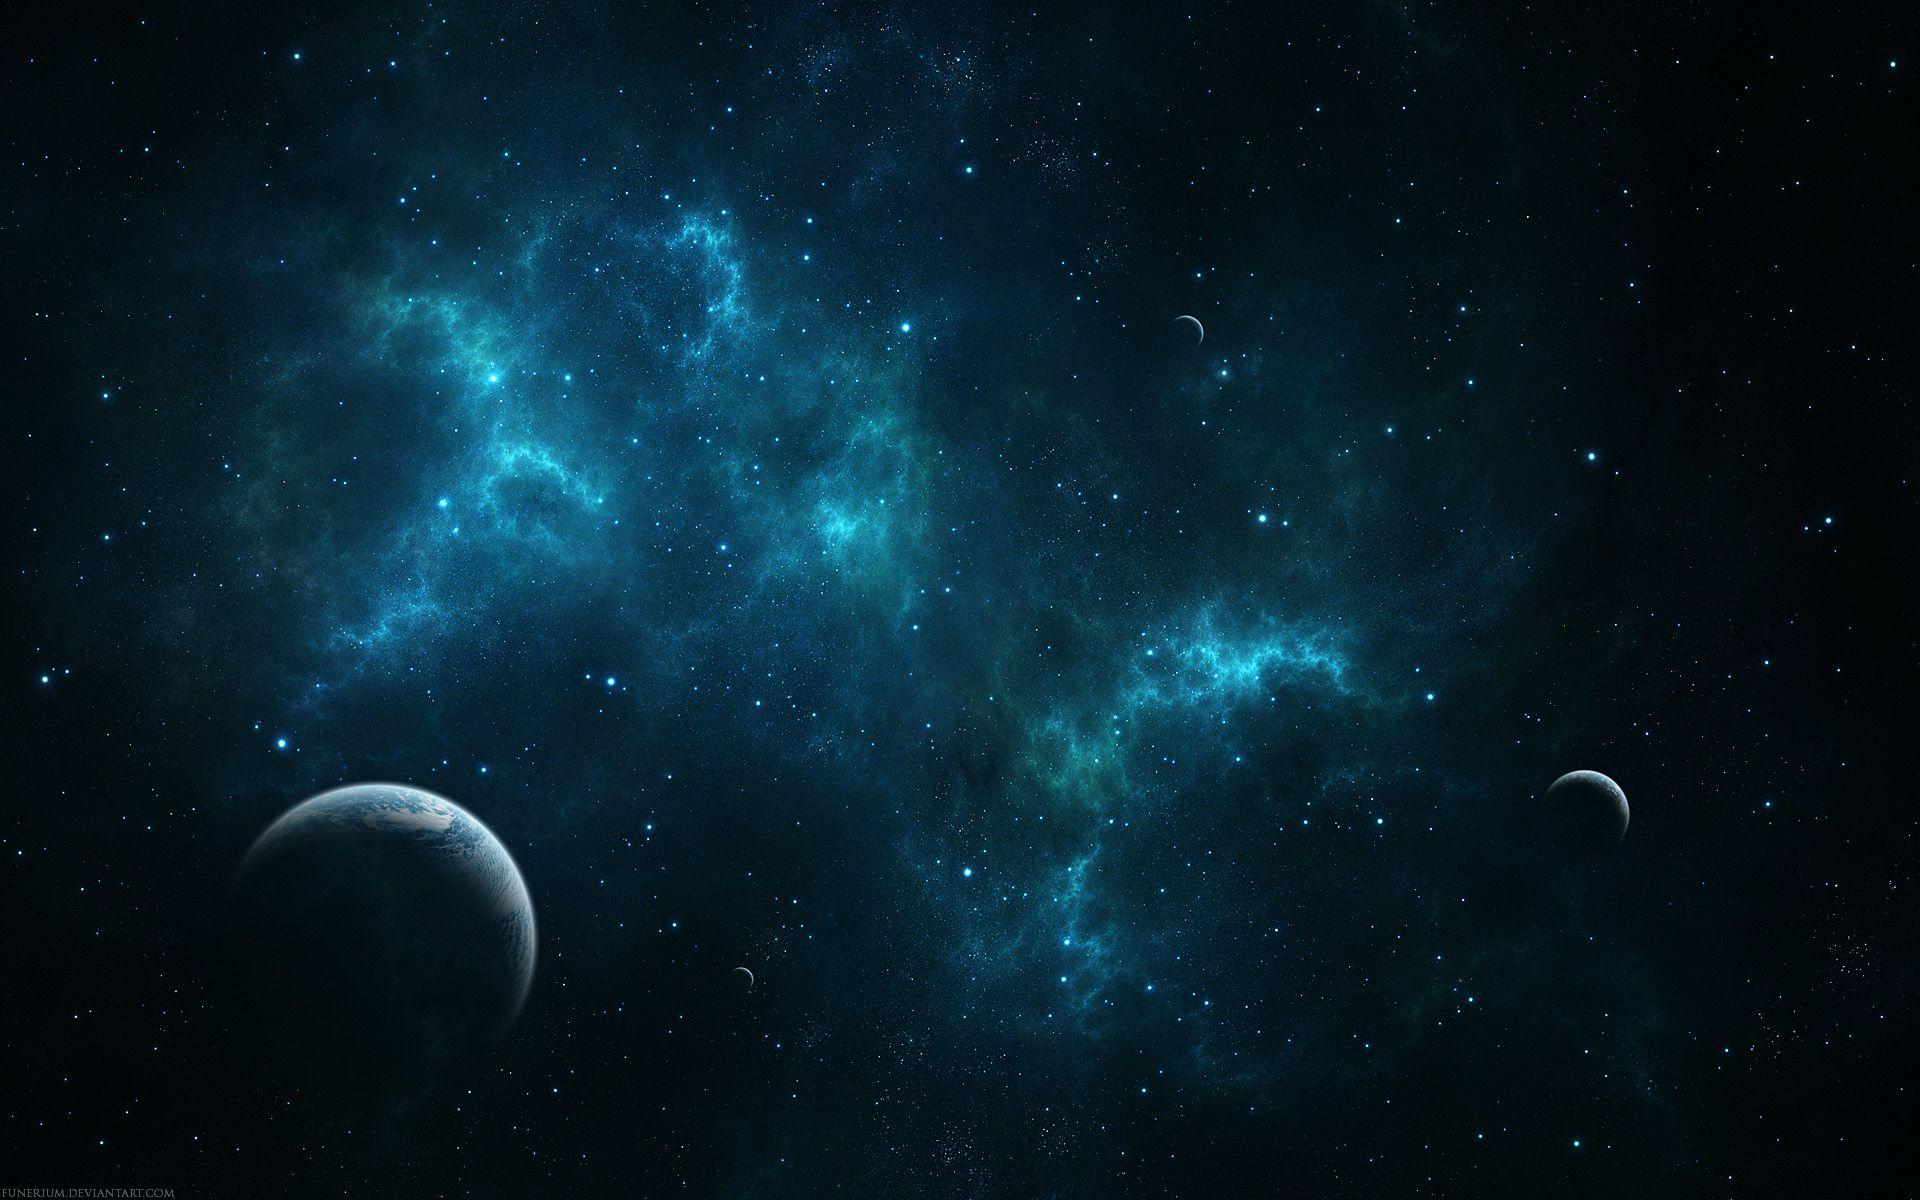 Download Free #Space #Wallpaper, Picture and Desktop Background